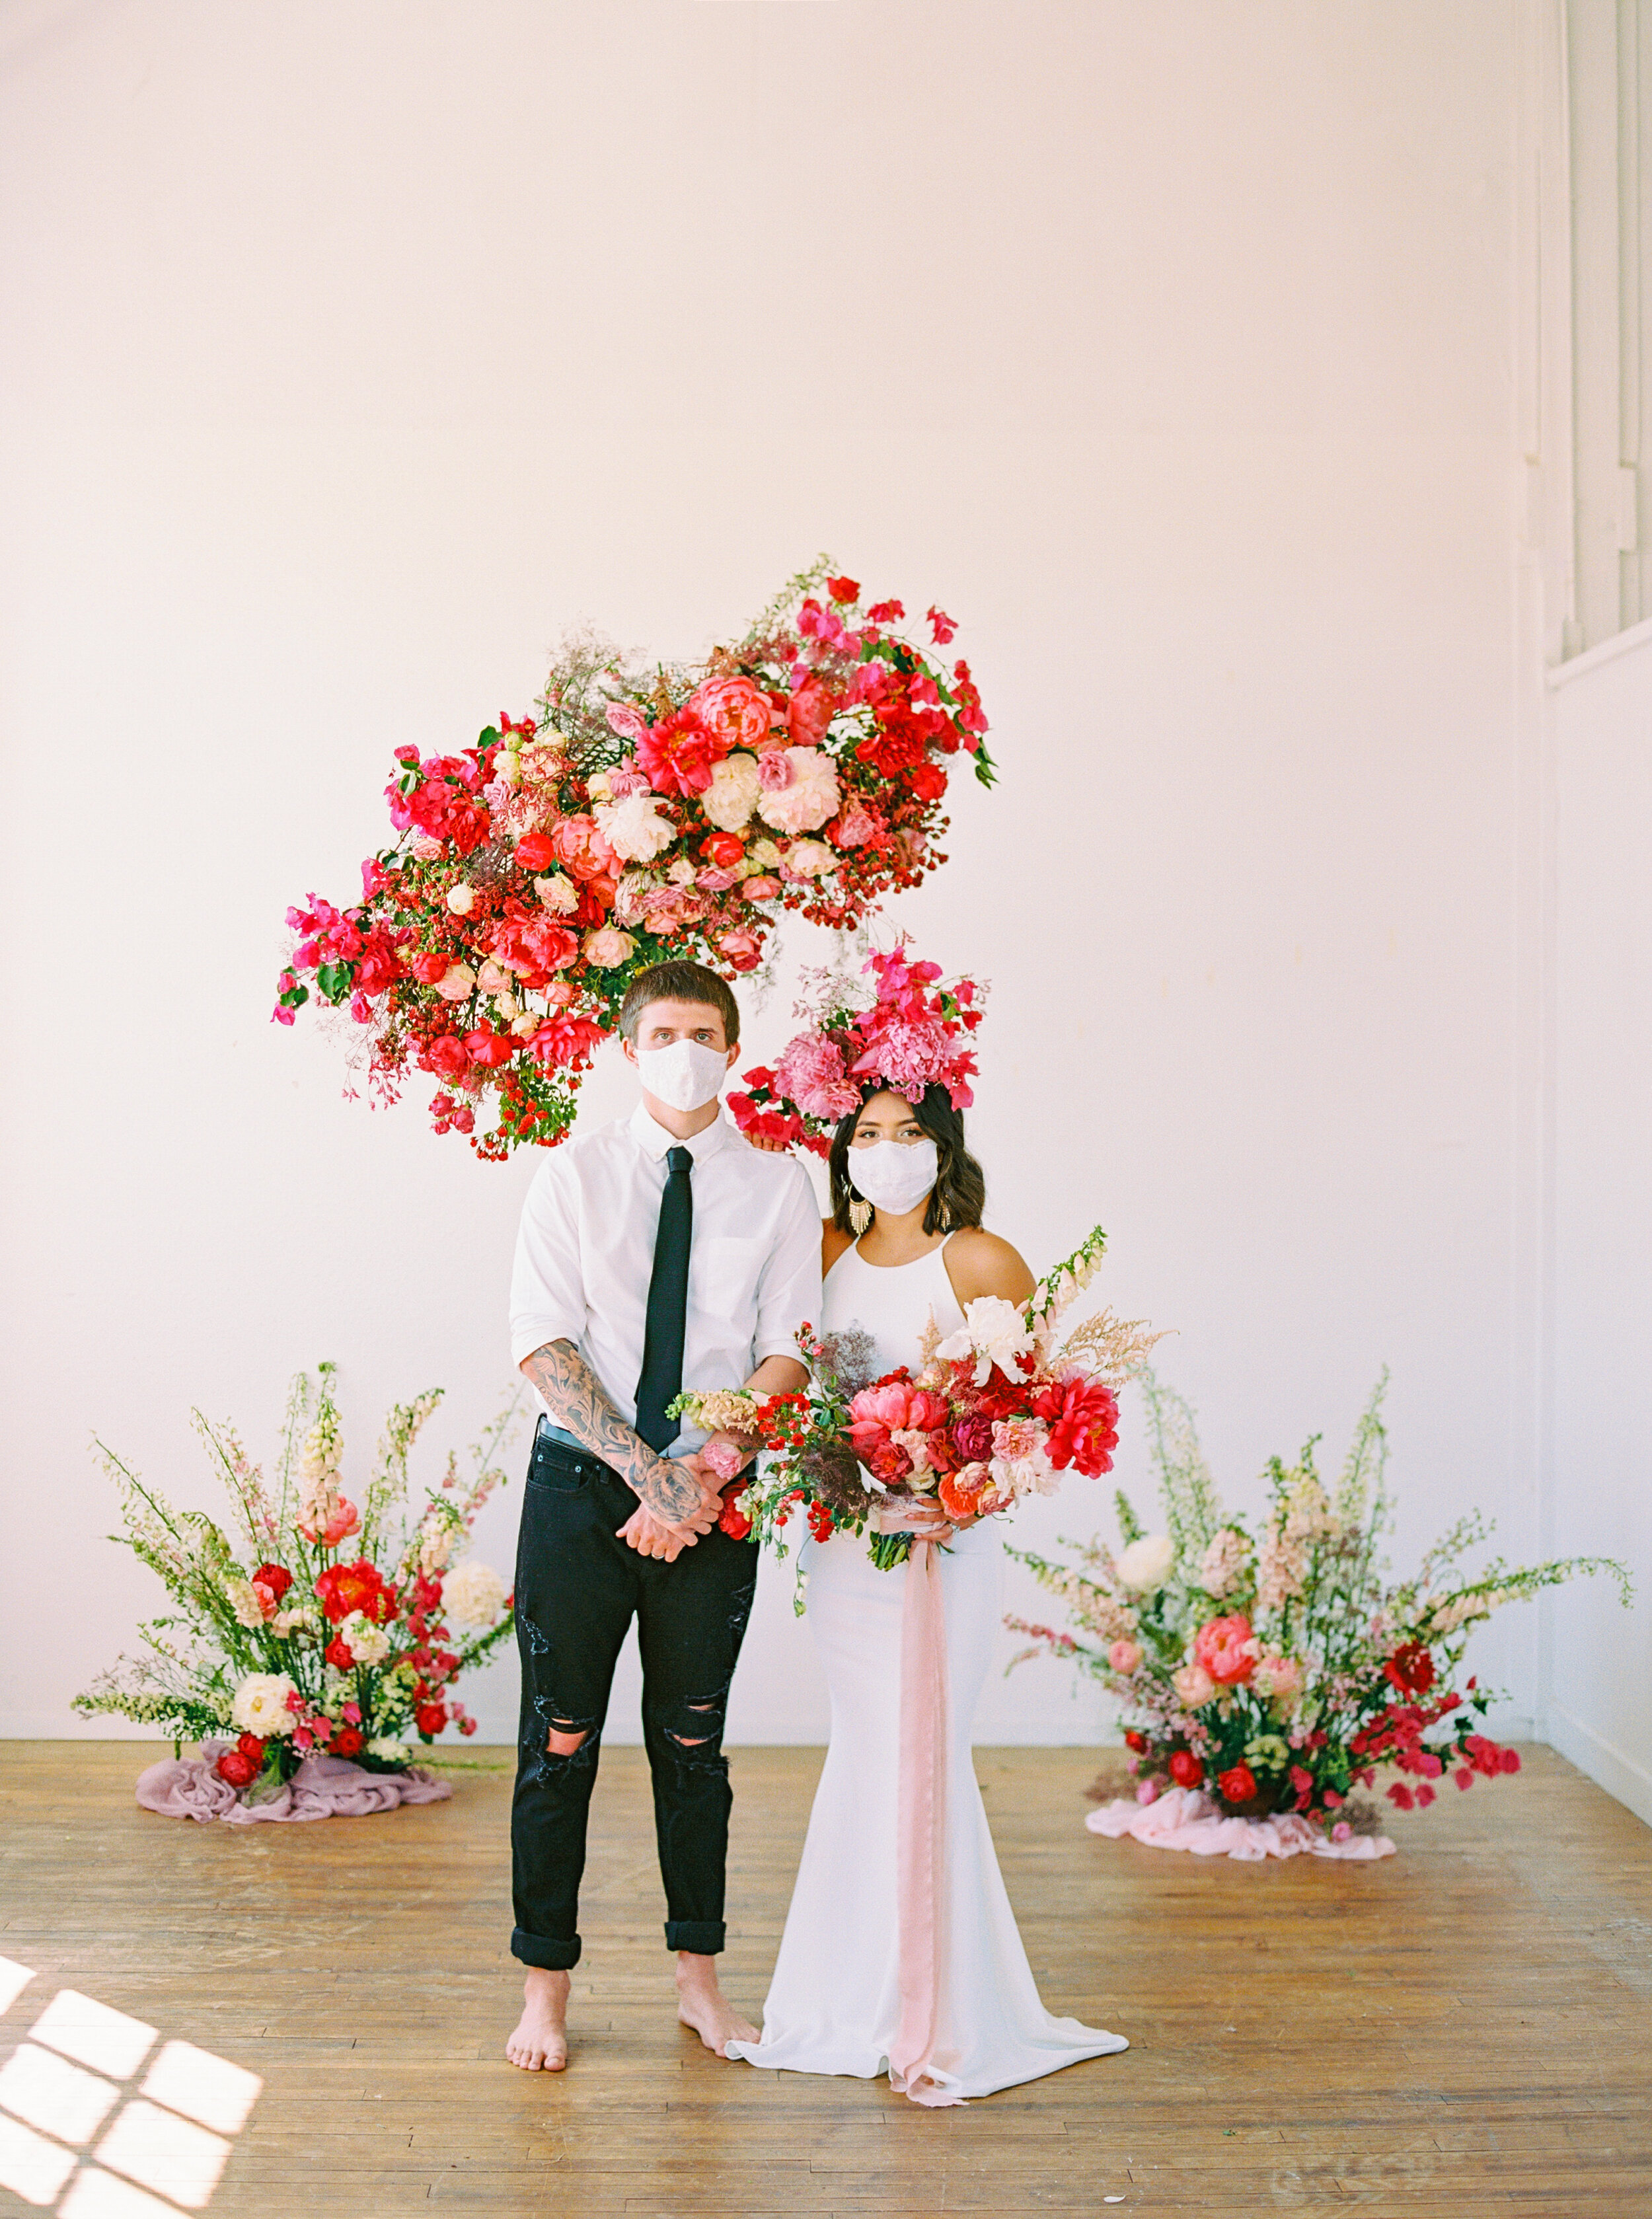 A Romantic Wedding Elopement Filled with Colorful Fuchsia - Sarahi Hadden Submission-43.jpg